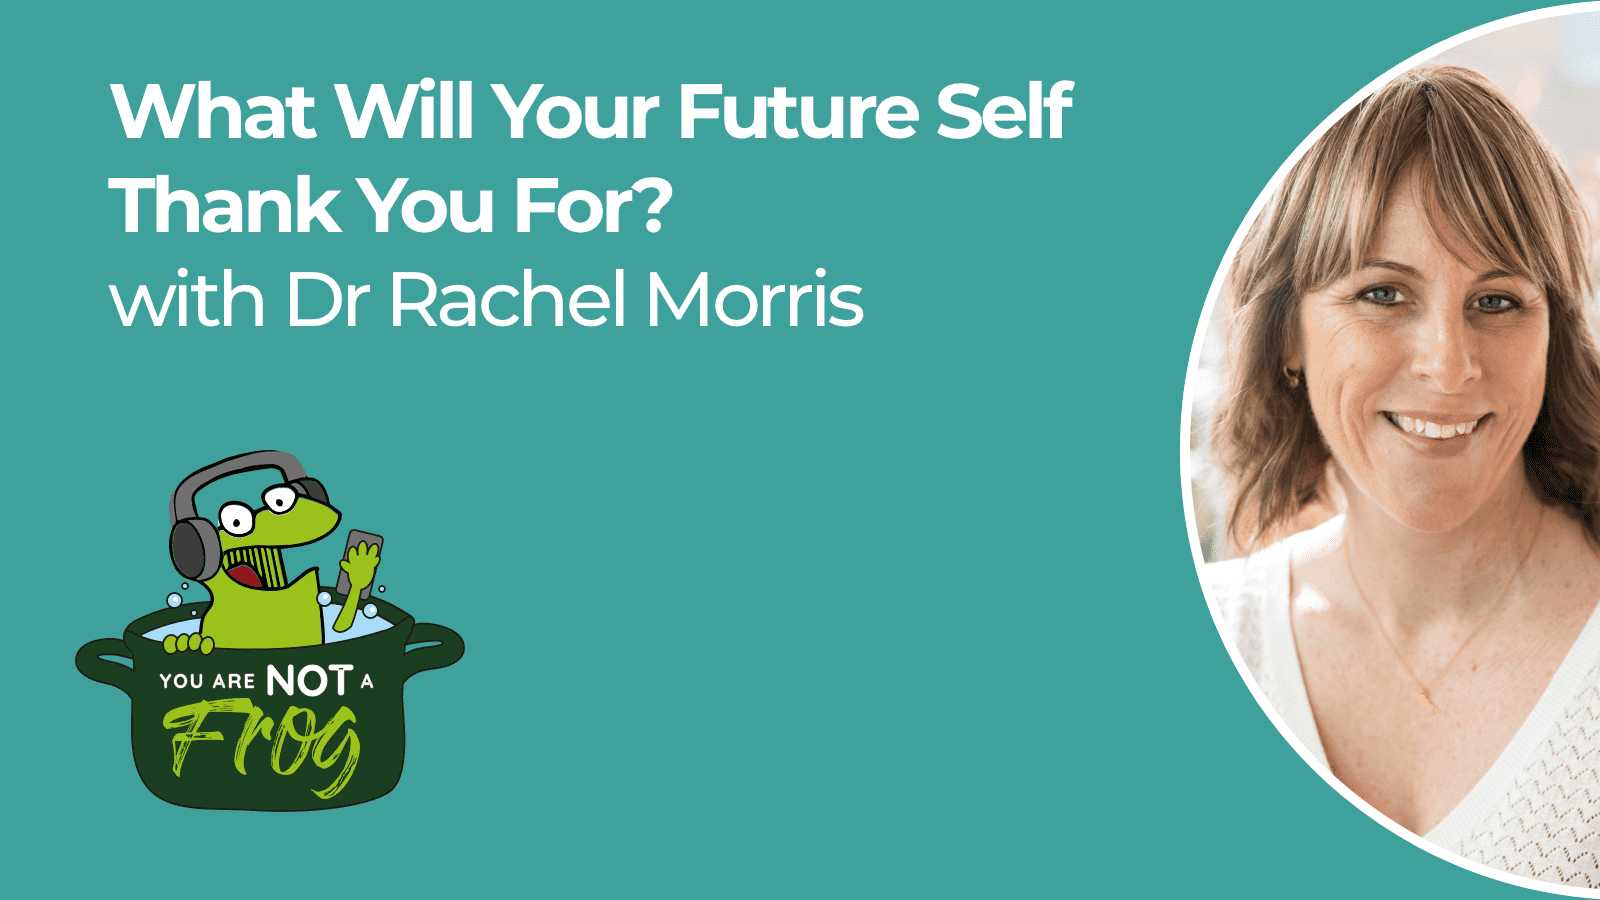 What Will Your Future Self Thank You For?